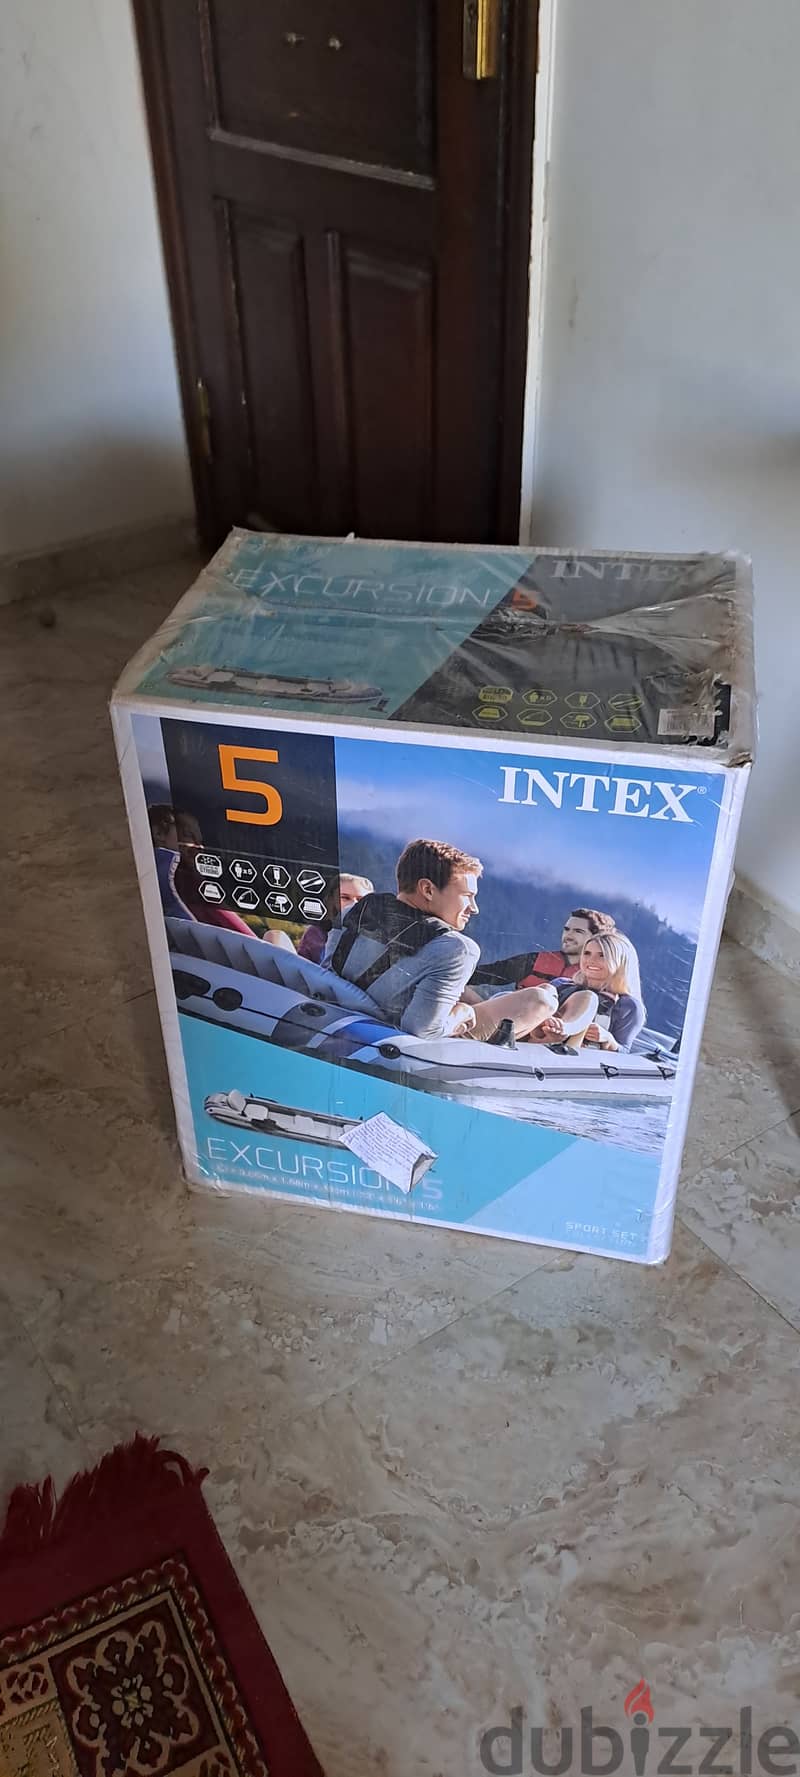 Intex Excursion 5 inflatable boat 3